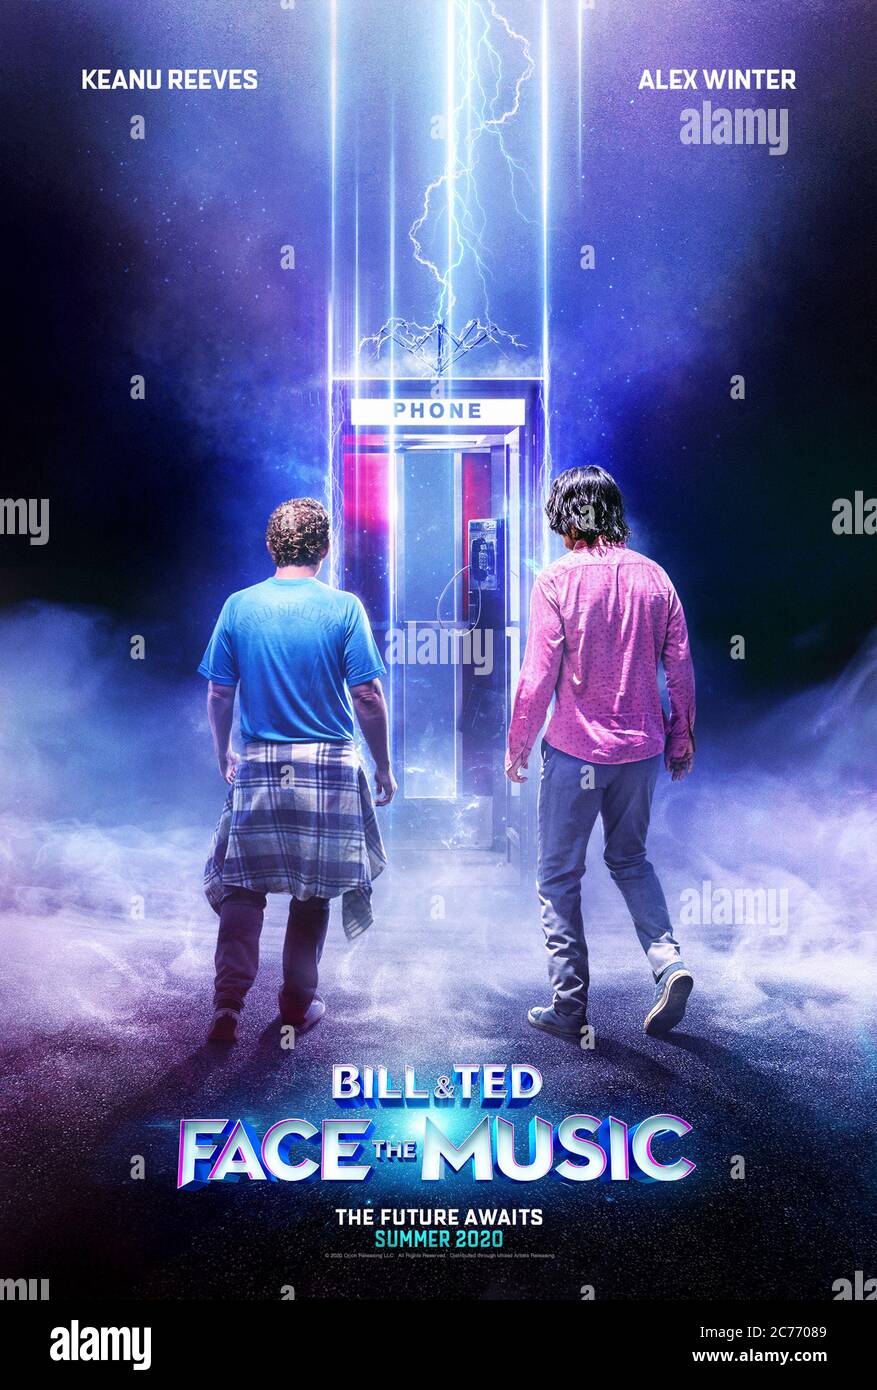 Bill & Ted Face the Music (2020) directed by Dean Parisot and starring Keanu Reeves, Alex Winter, Samara Weaving and William Sadler. The Wyld Stallyns return in middle age to fulfill their destiny. Stock Photo